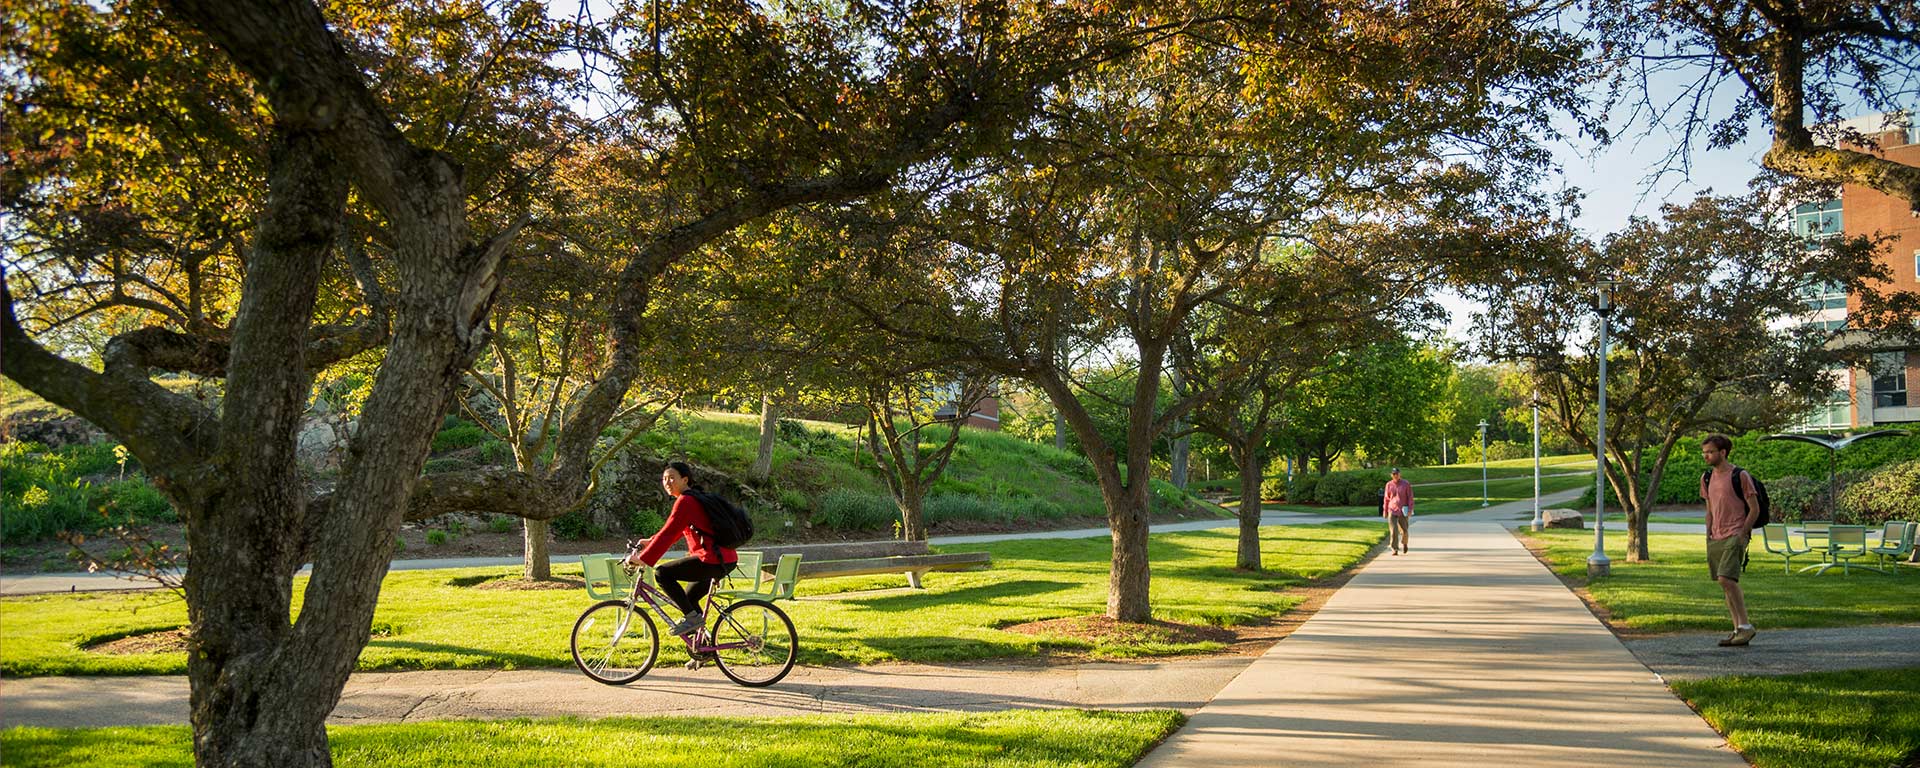 Trees and paths on campus, two students walking at a distance, one student riding a bike